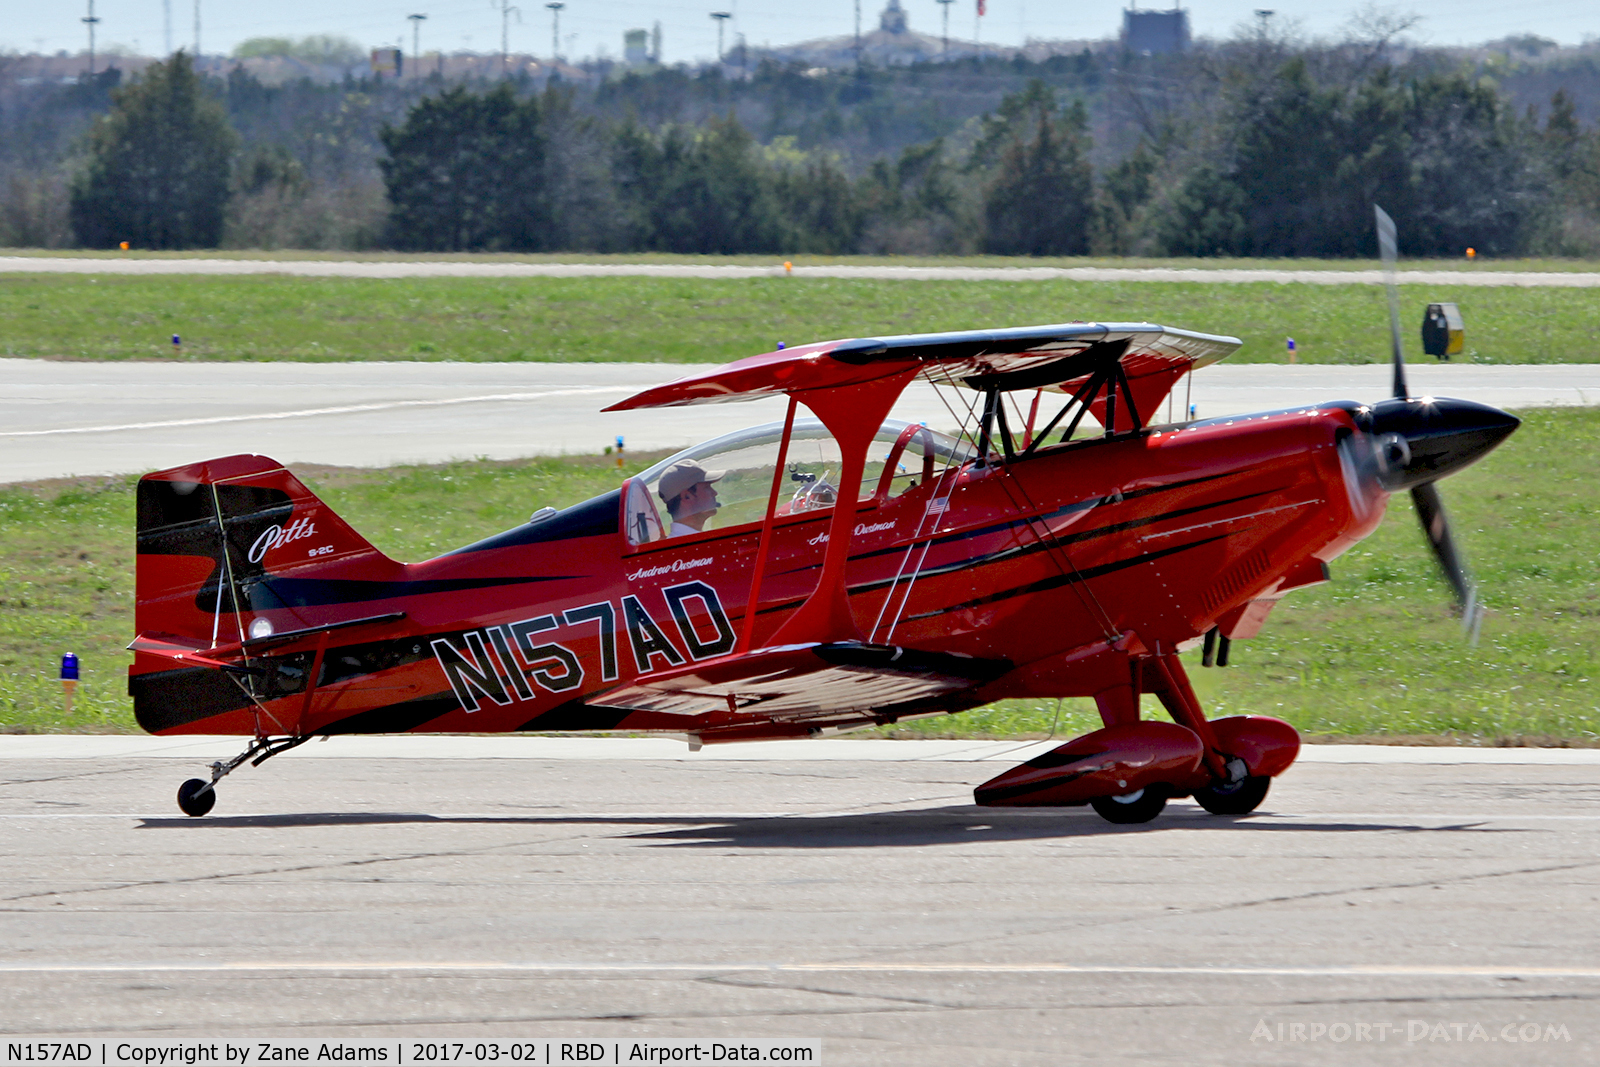 N157AD, 2012 Aviat Pitts S-2C Special C/N 6088, At Dallas Executive Airport